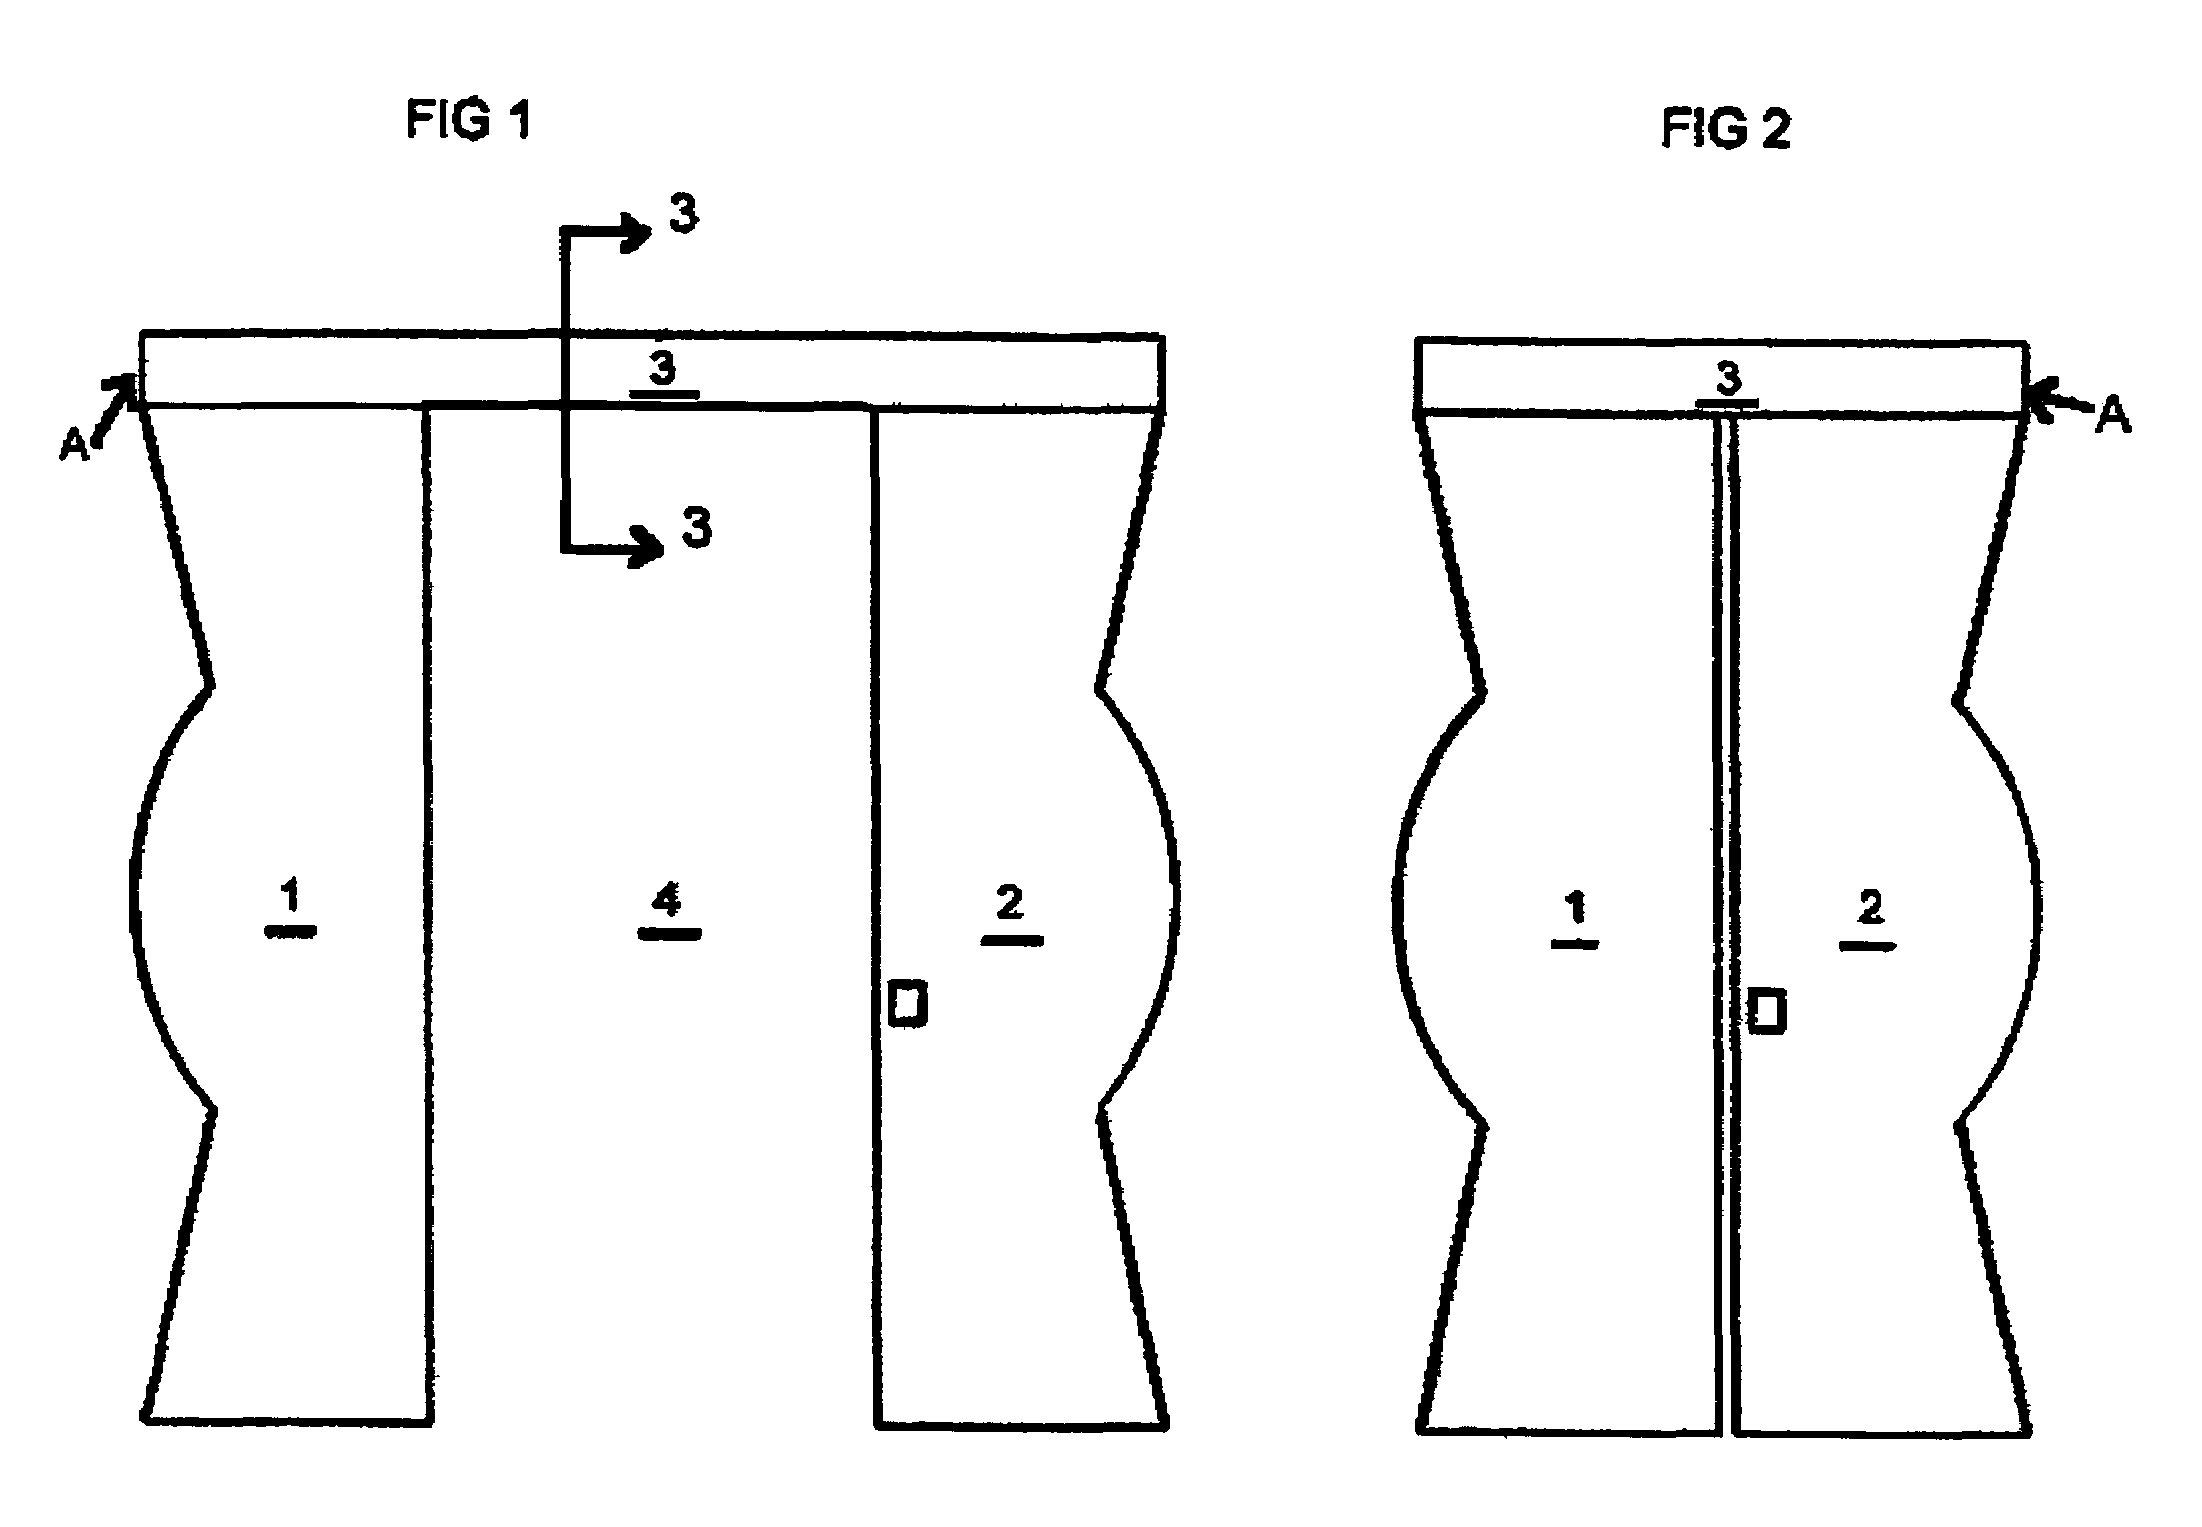 Wall-mounted sliding door system and method